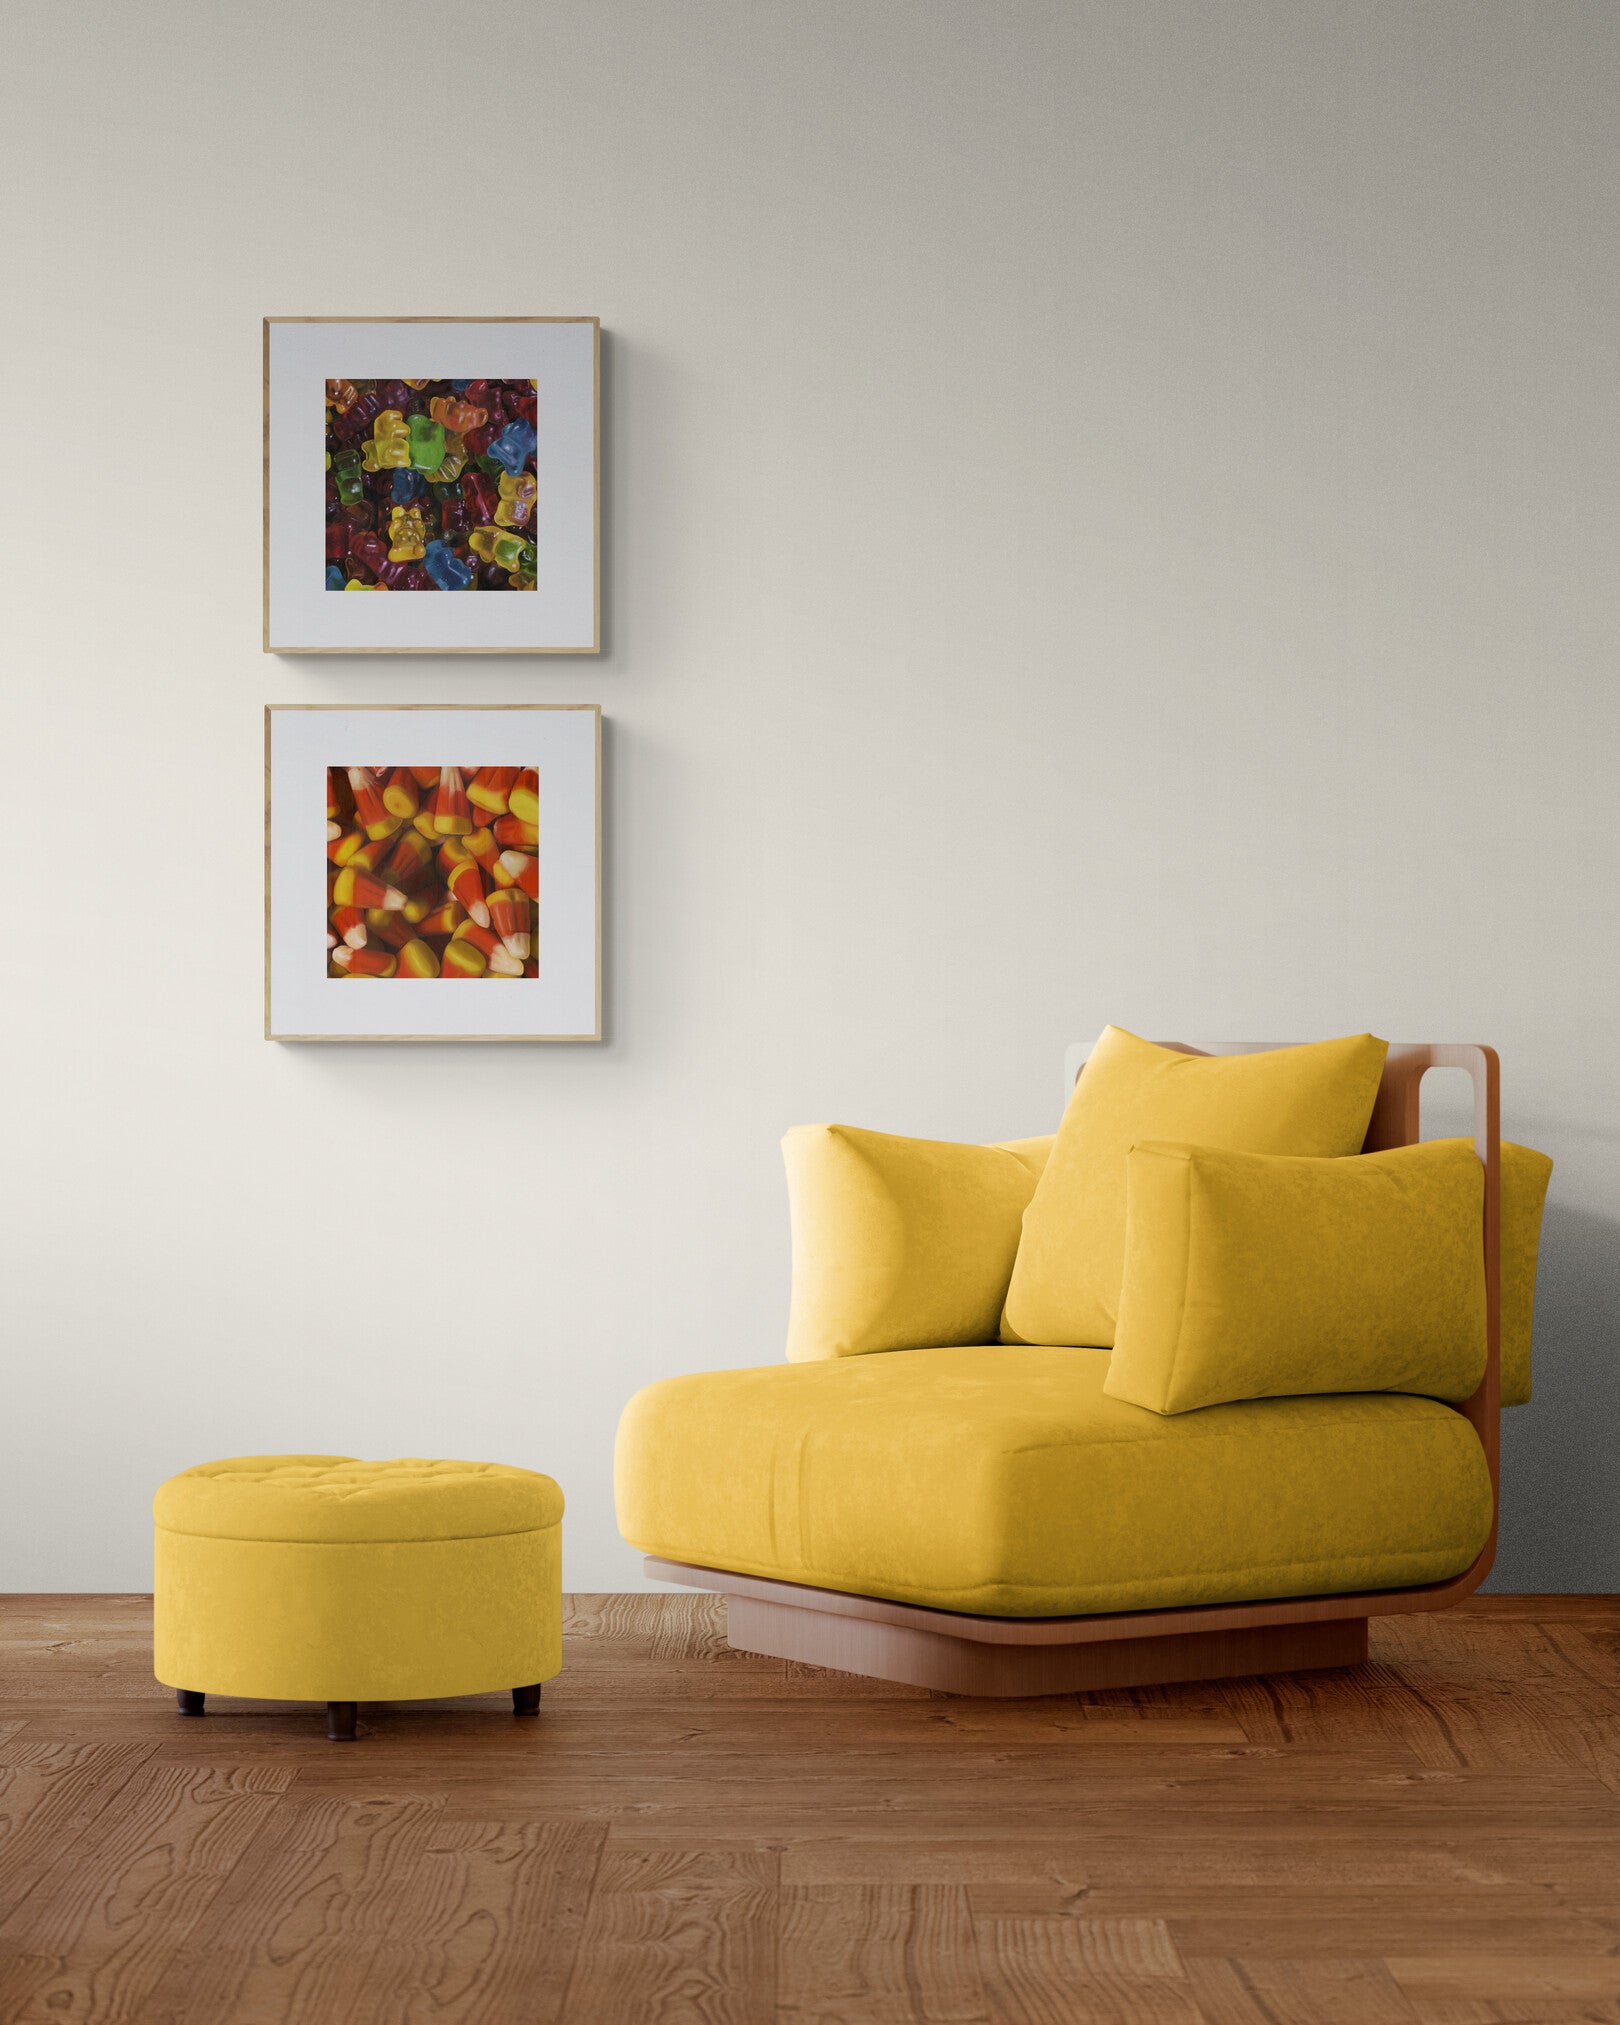 The original paintings “Gummy Bears" and “Candy Corn” by Hannah Kilby from Hannah Michelle Studios, displayed as fine art prints.